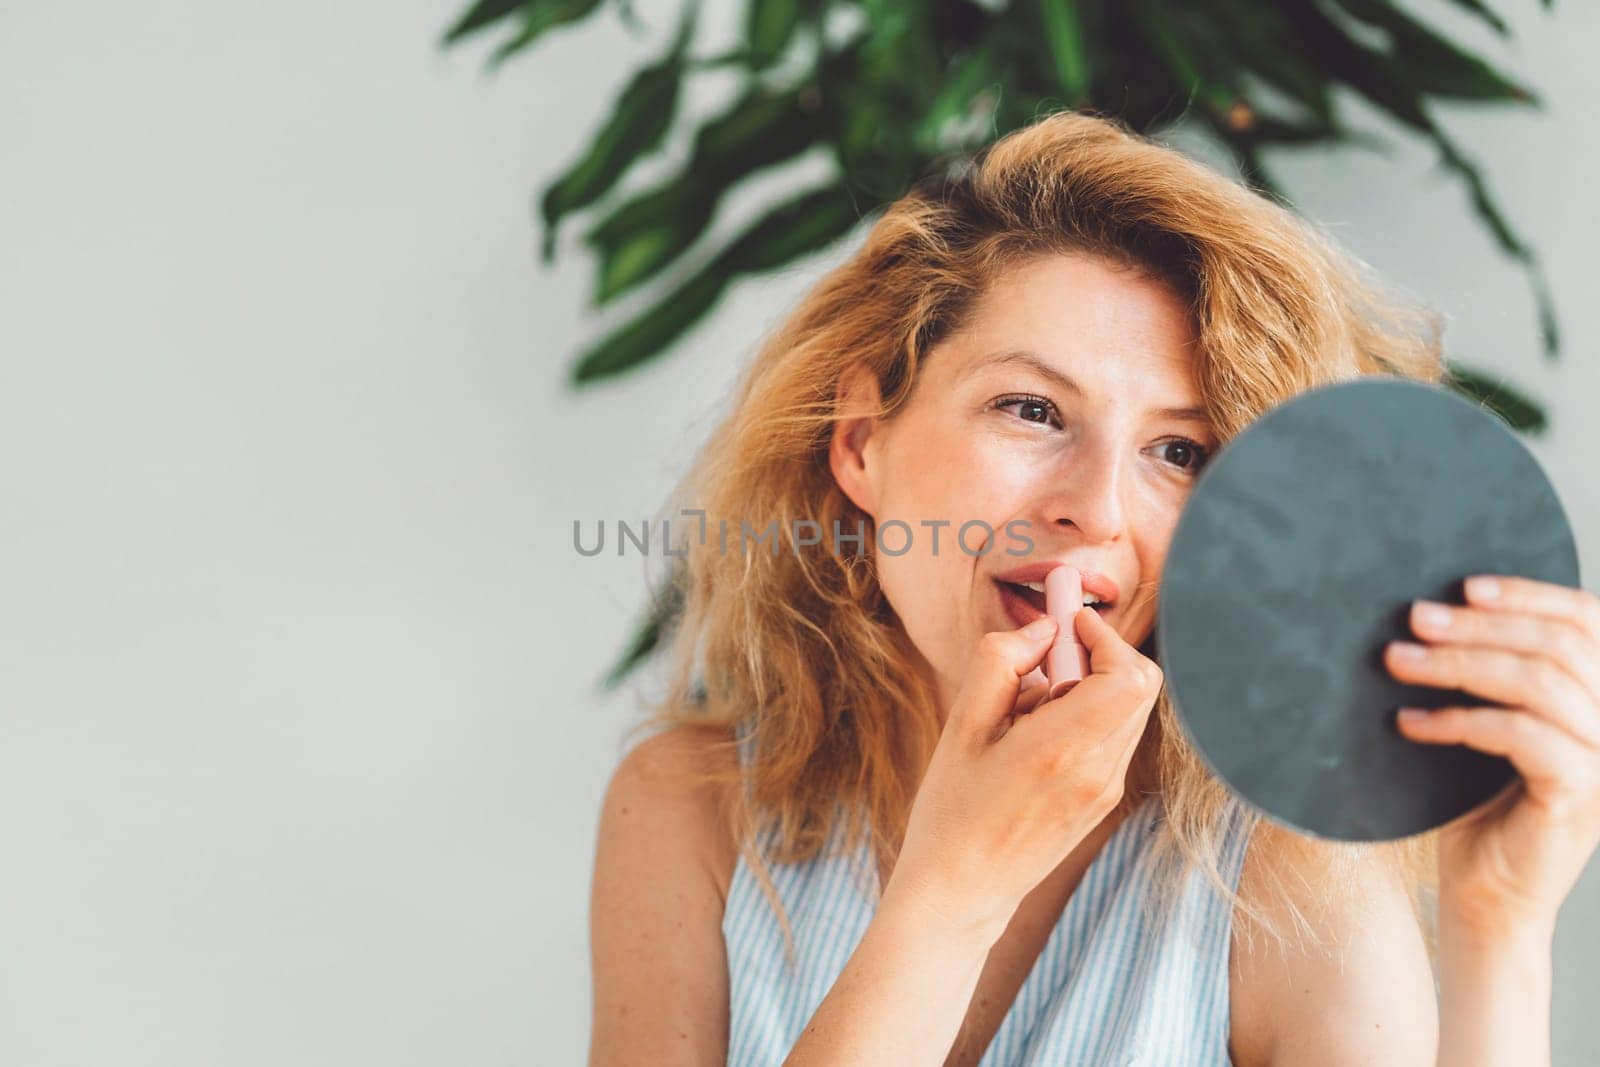 Wait up portrait of a woman doing her lipstick, looking at the small round mirror she is holding up by VisualProductions